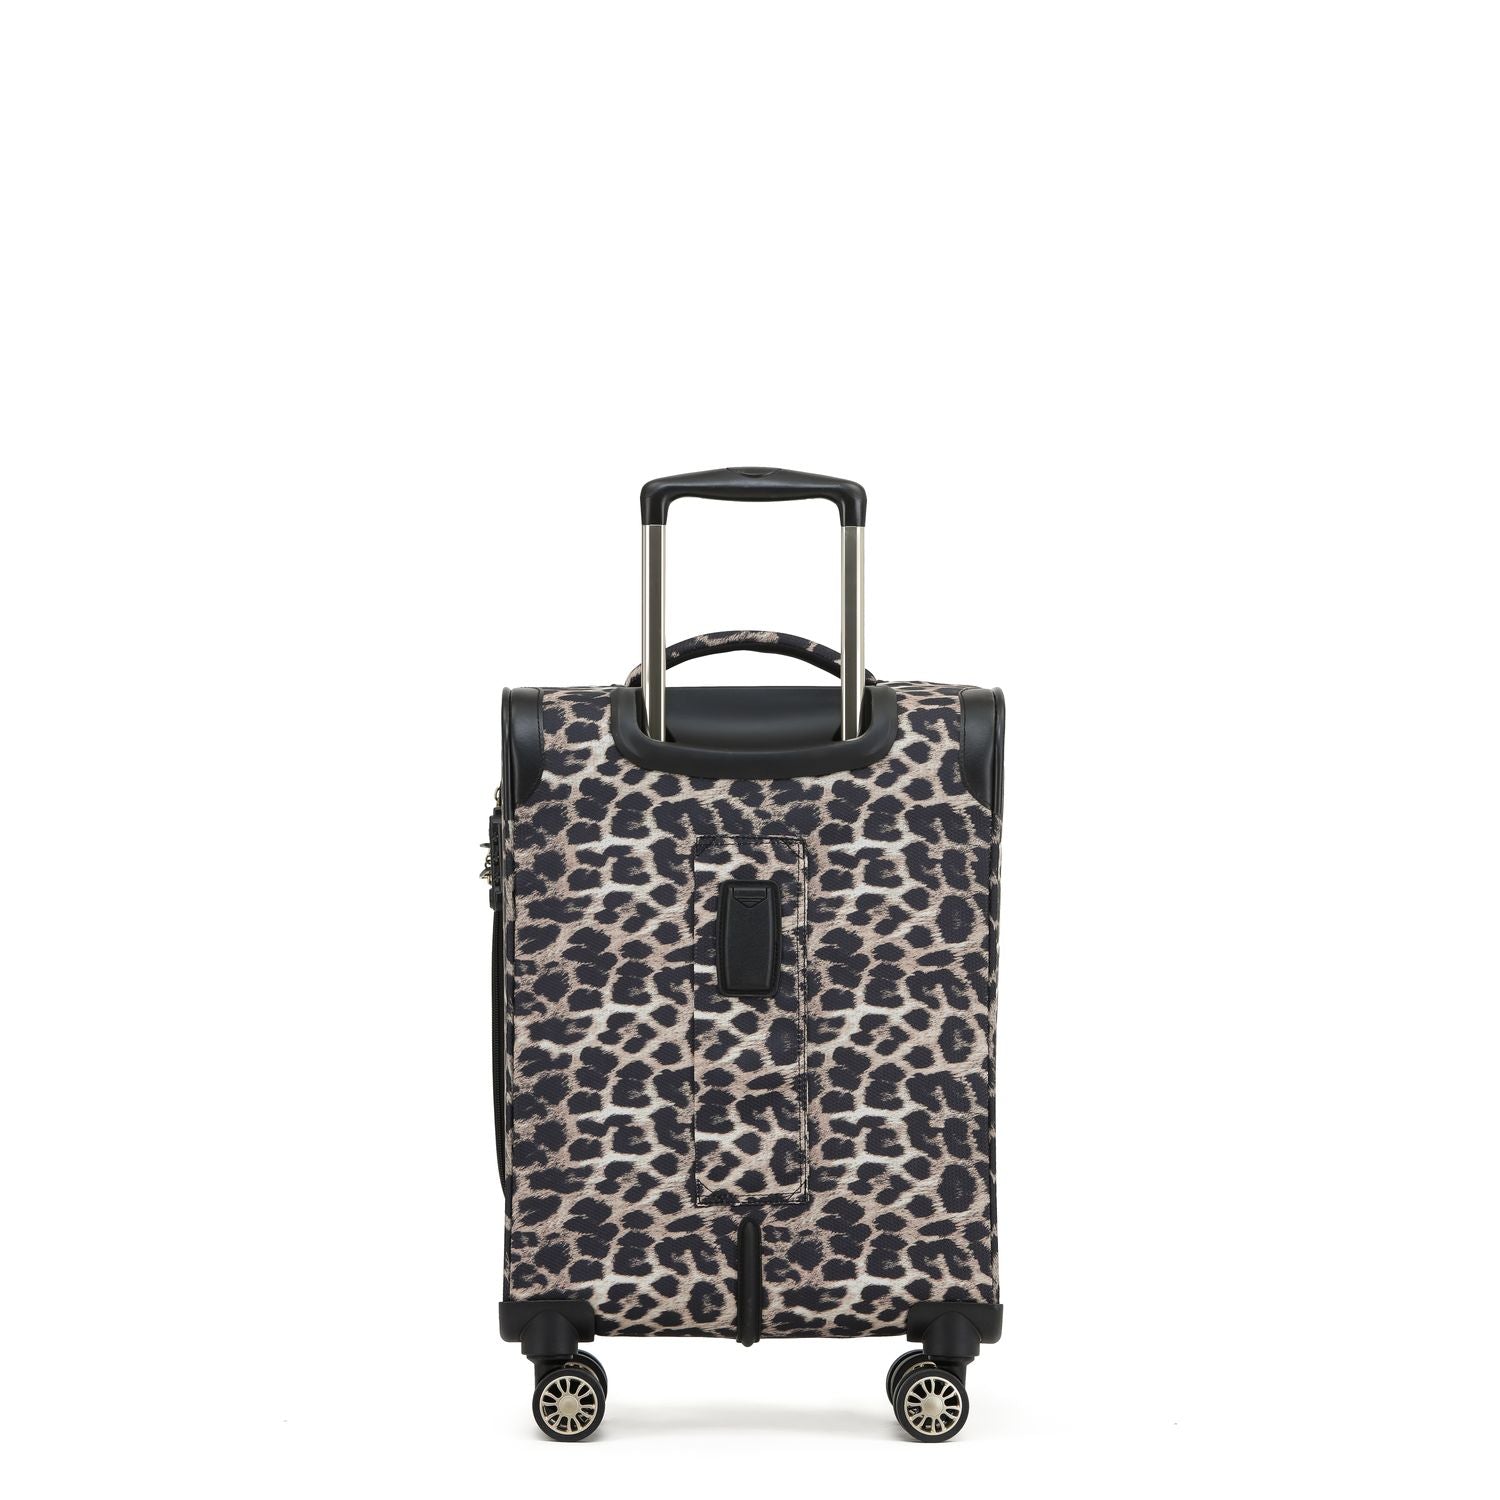 Tosca - So Lite 3.0 20in Small 4 Wheel Soft Suitcase - Leopard - 0